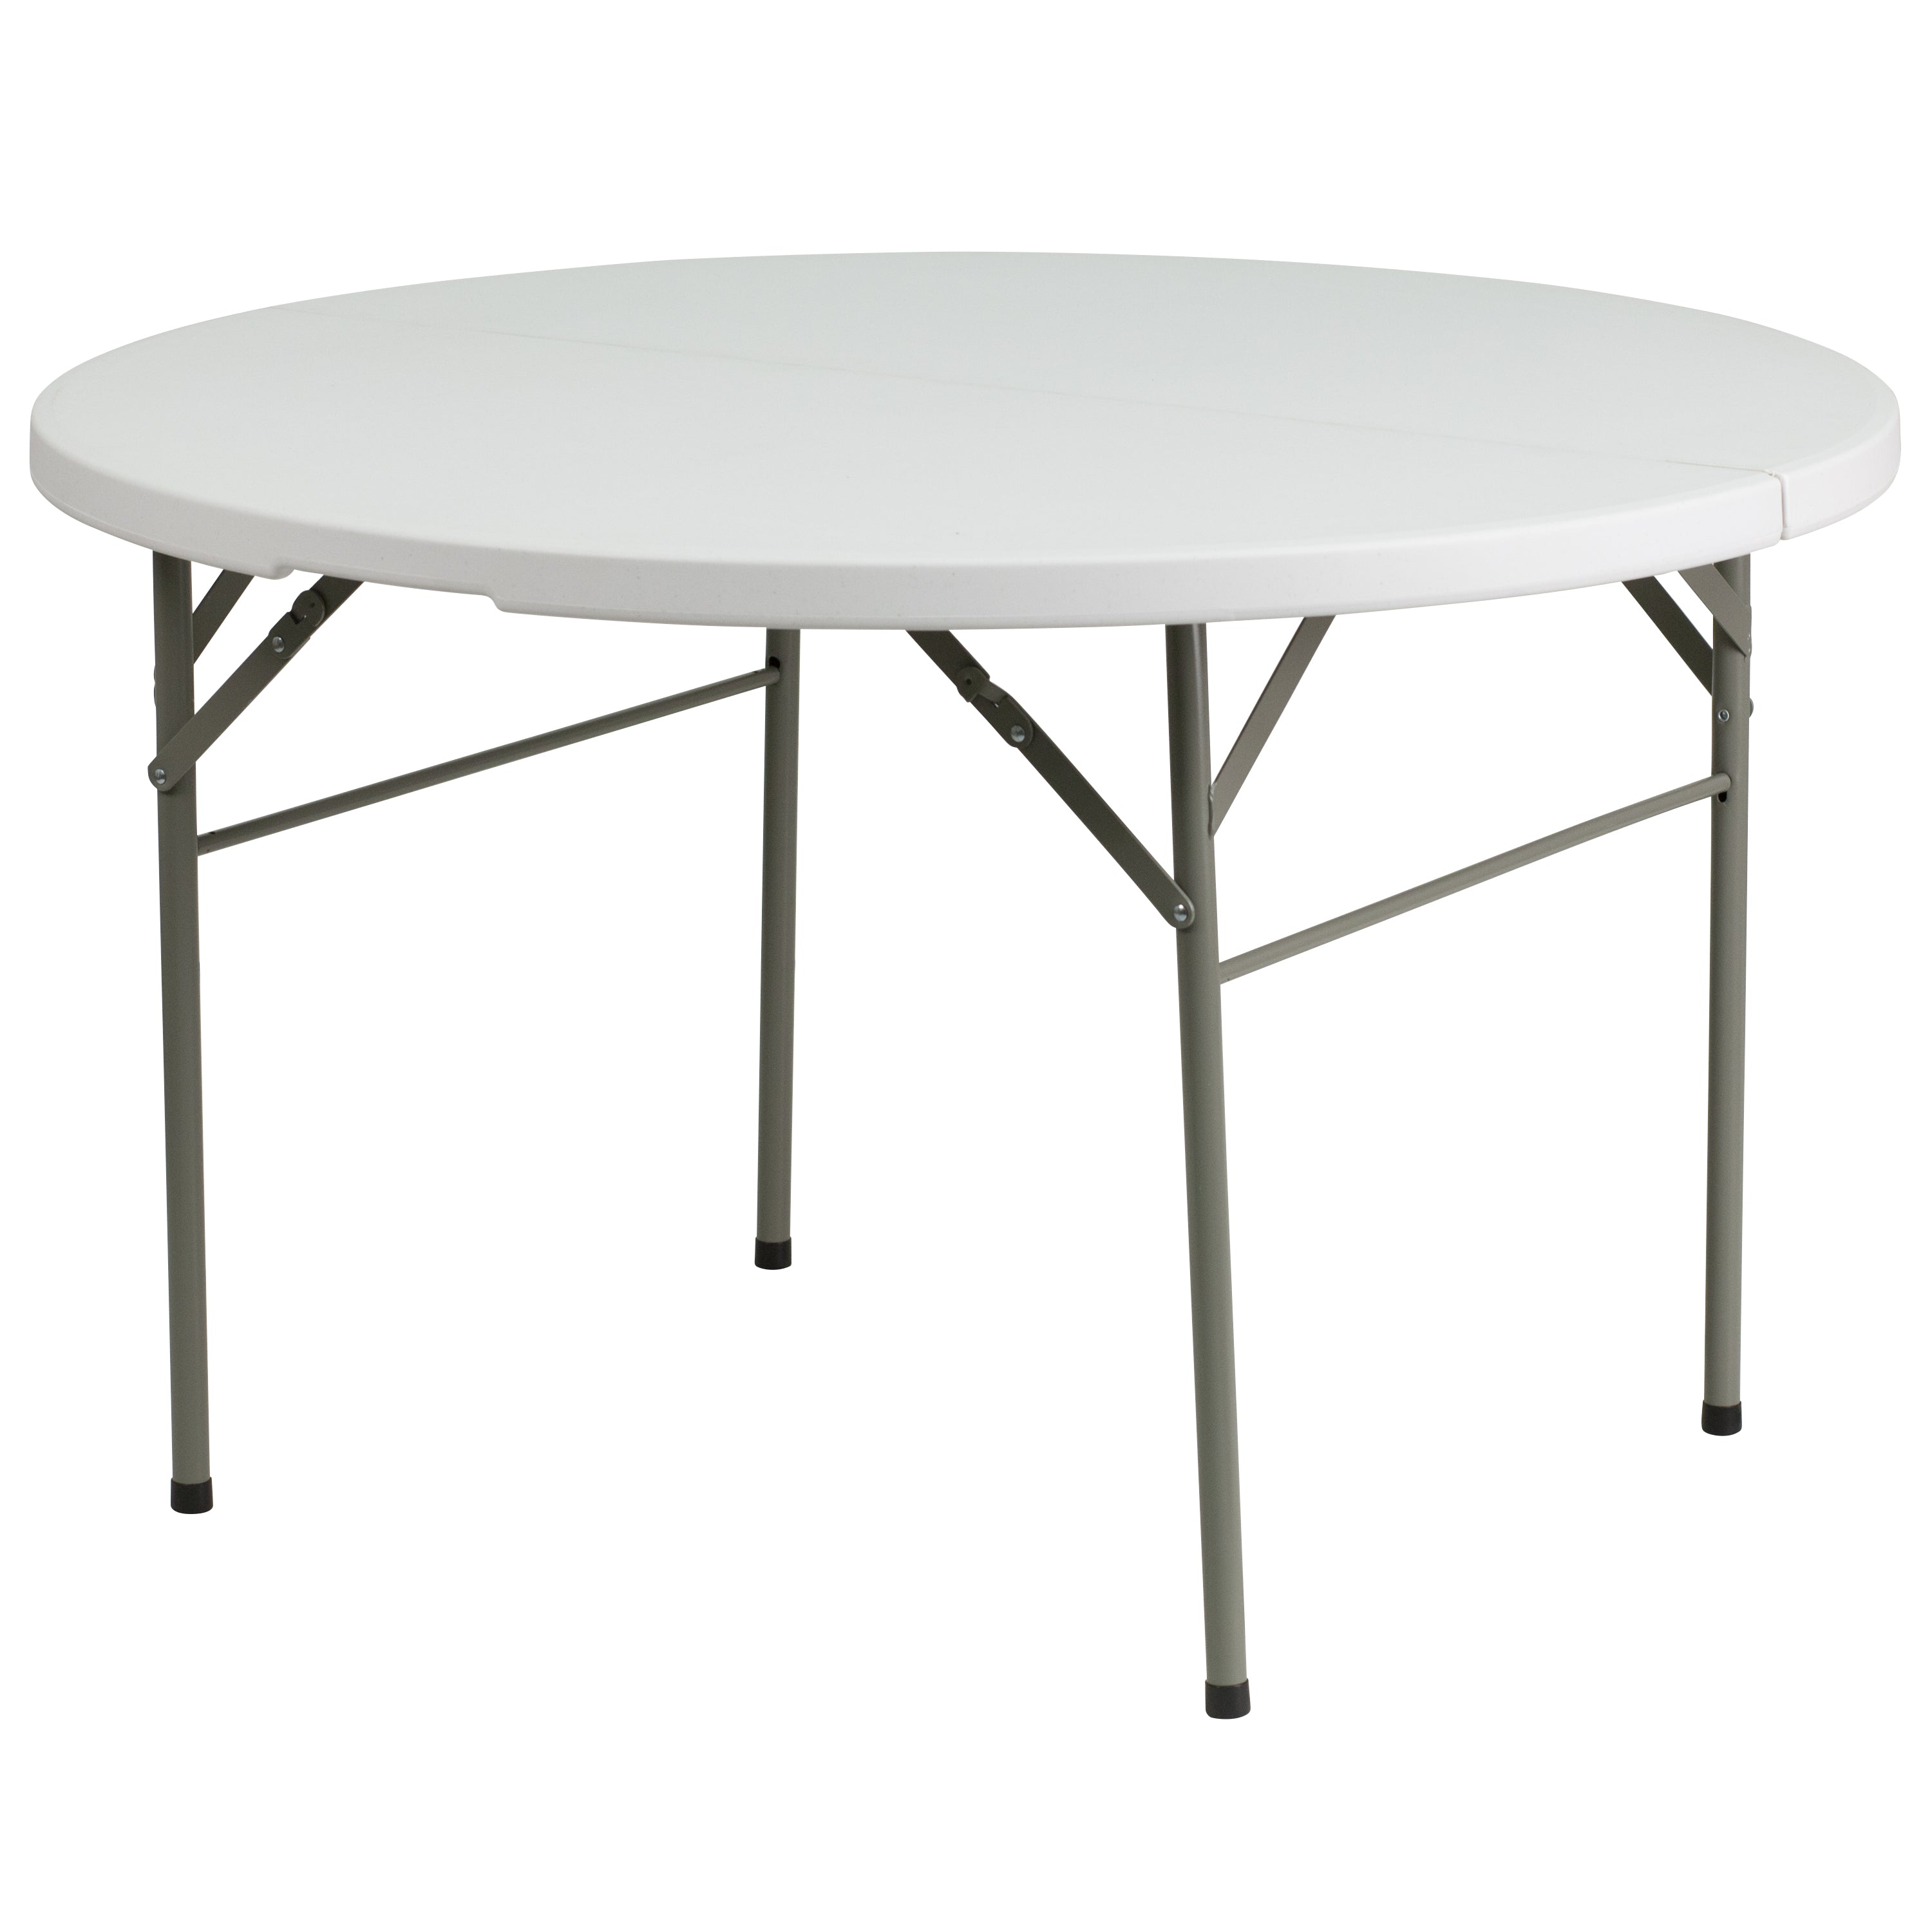 4-Foot Round Bi-Fold Plastic Banquet and Event Folding Table with Carrying Handle-Round Plastic Folding Table-Flash Furniture-Wall2Wall Furnishings